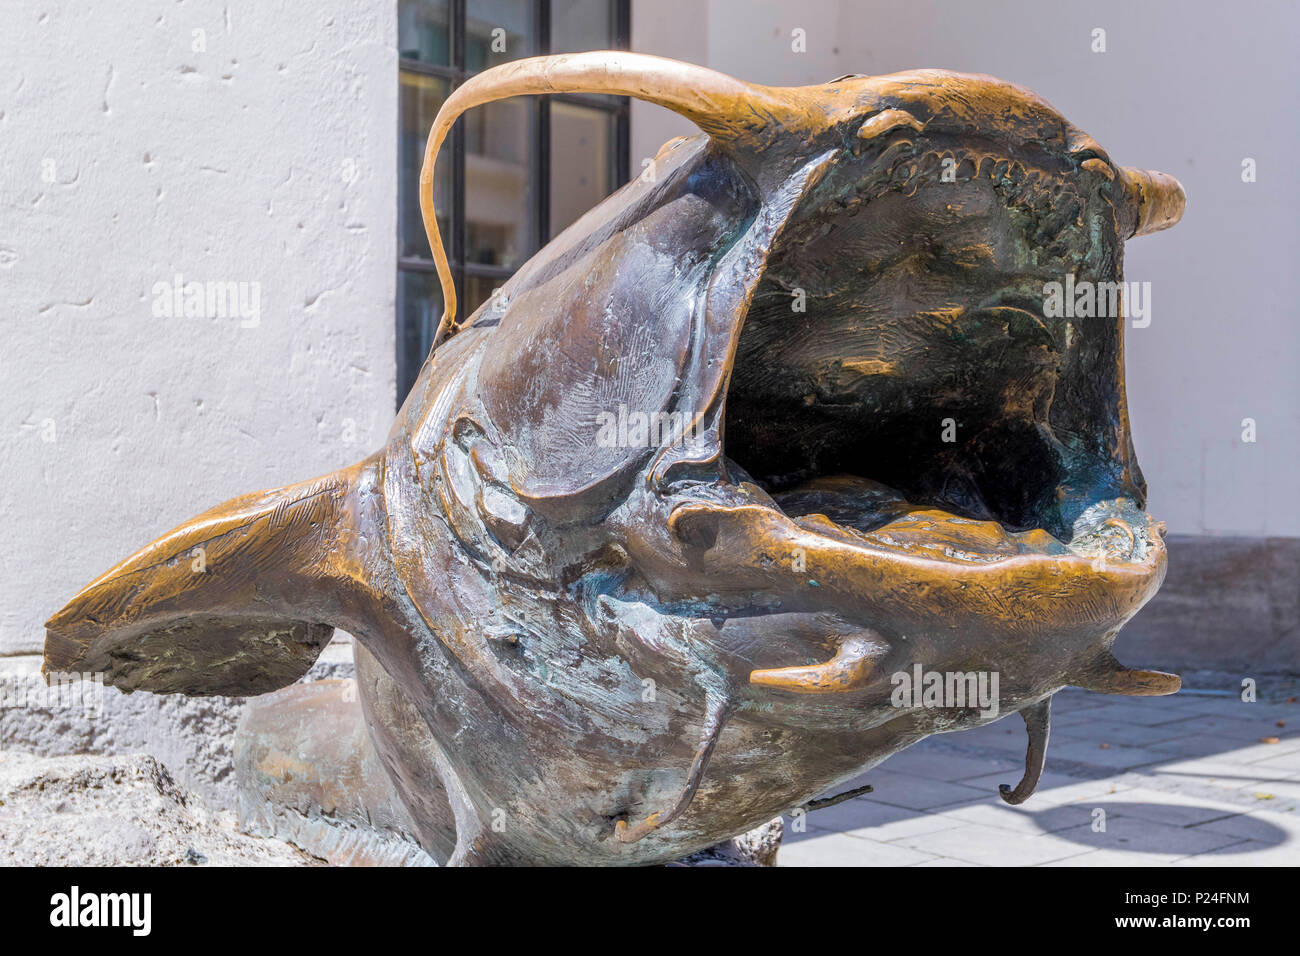 German Hunting and Fishing Museum in the former Augustinian Church, bronze sculpture of a fish, Munich, Bavaria, Germany, Europe Stock Photo